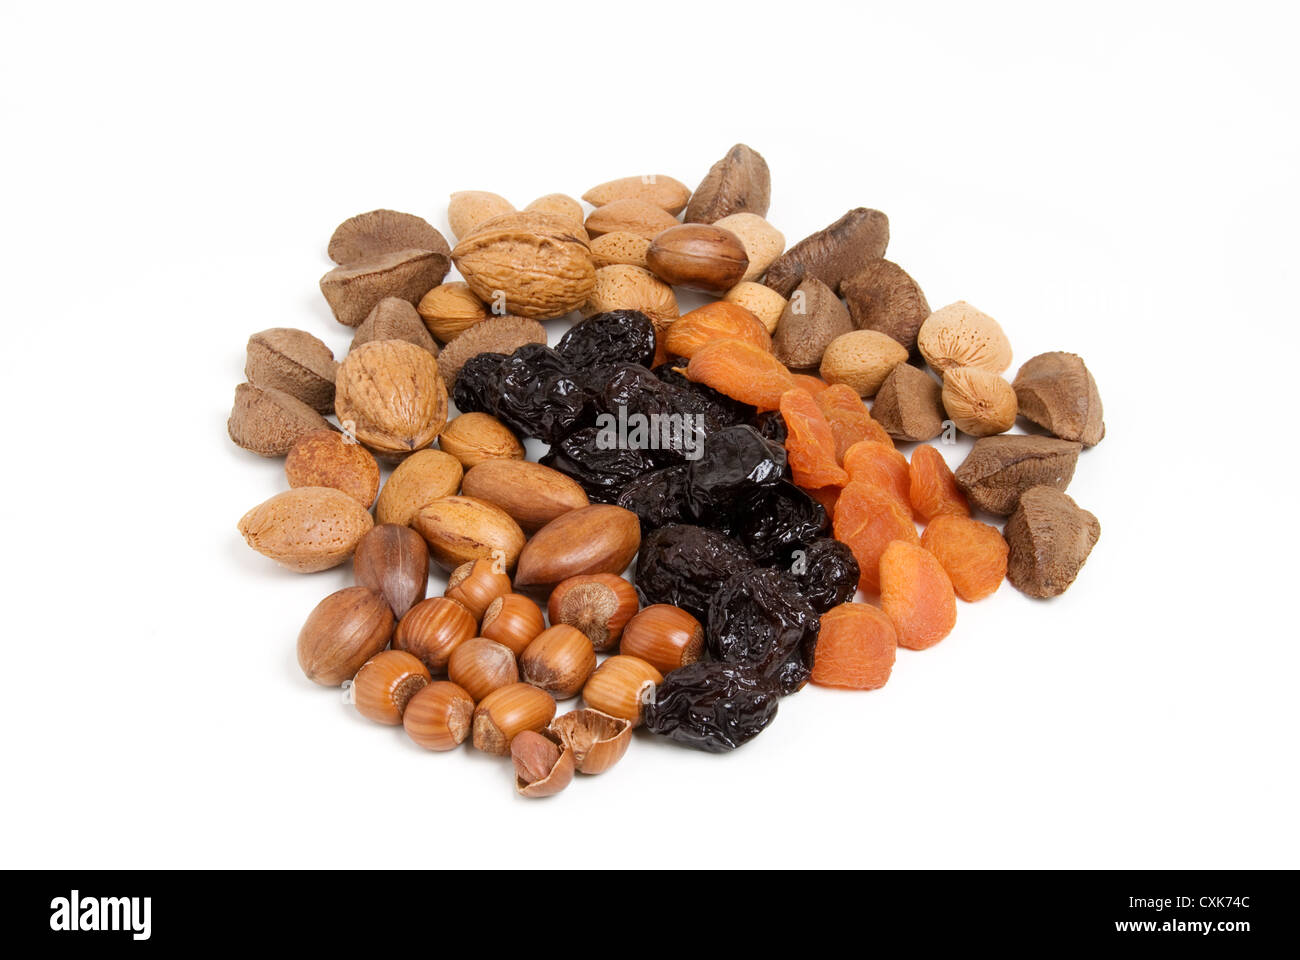 Dried prunes and assortment of nuts isolated, healthy food concept. Stock Photo